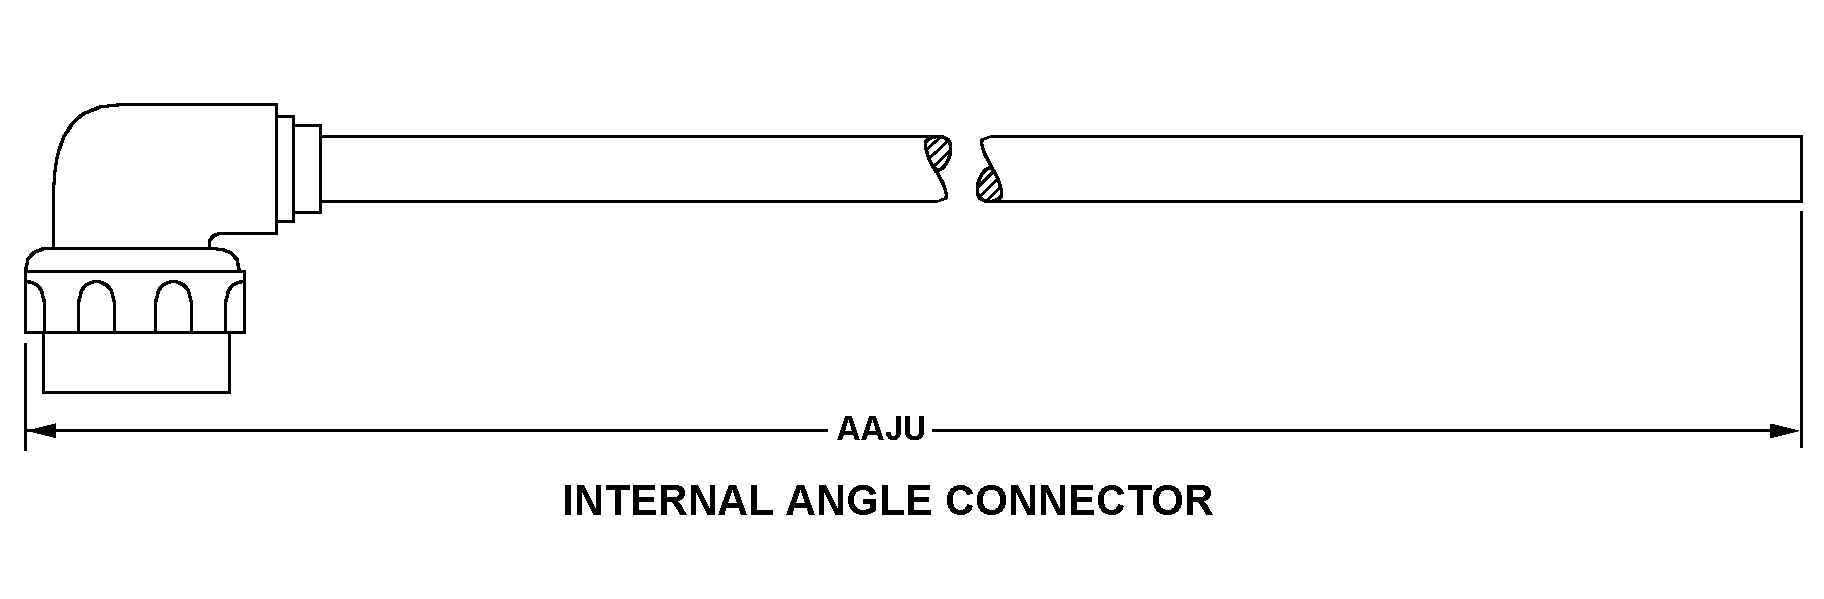 INTERNAL ANGLE CONNECTOR style nsn 5995-00-126-9829